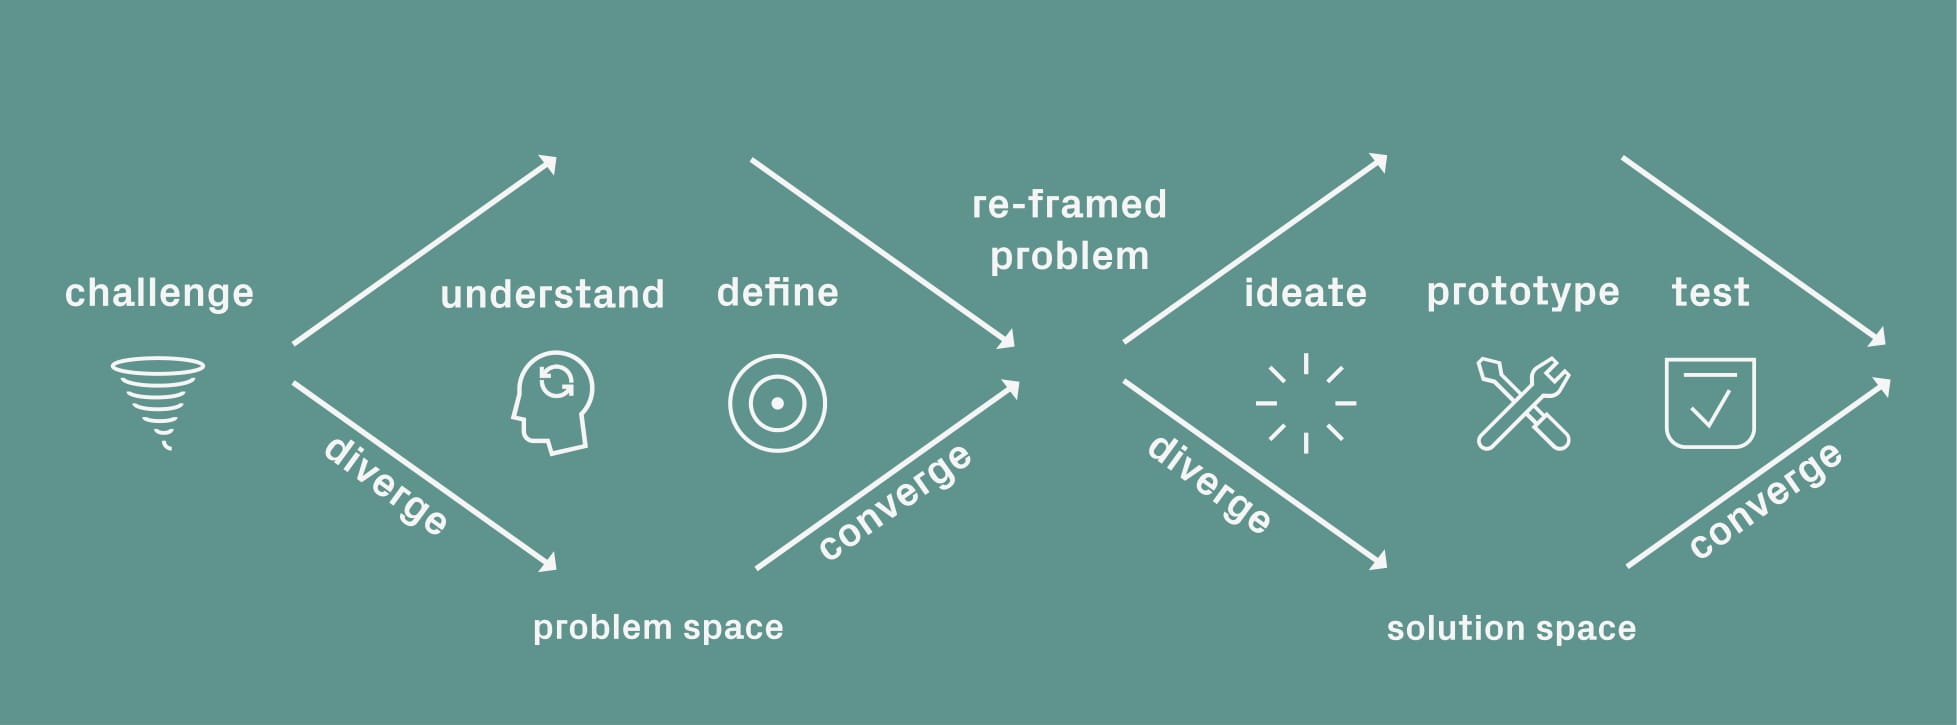 Design thinking as an iterative play between problem space and solution space. Adapted from Soventa.